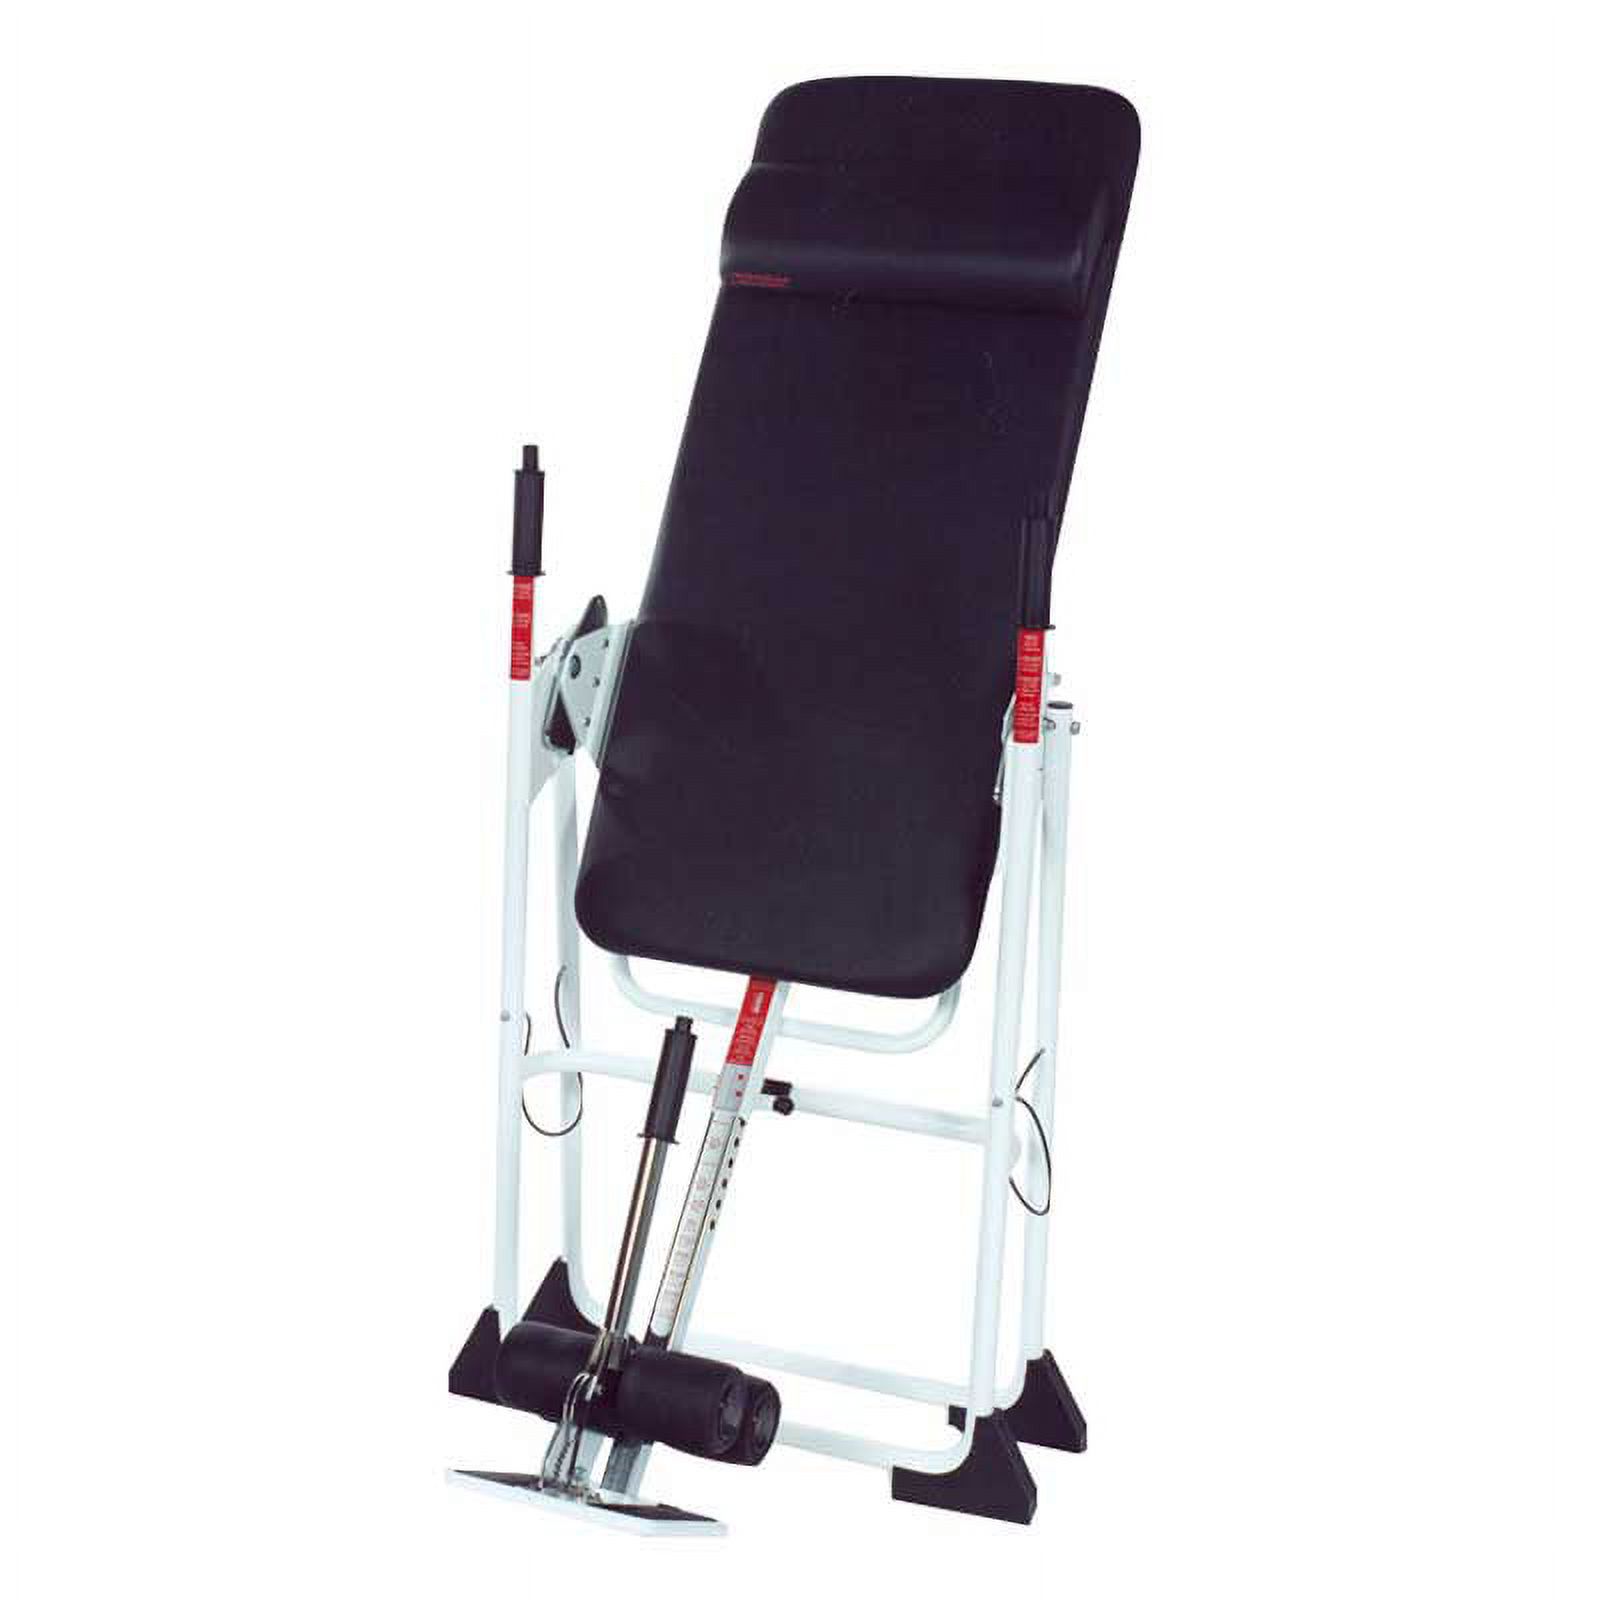 Mastercare Back-A-Traction Inversion Table Home - image 1 of 3